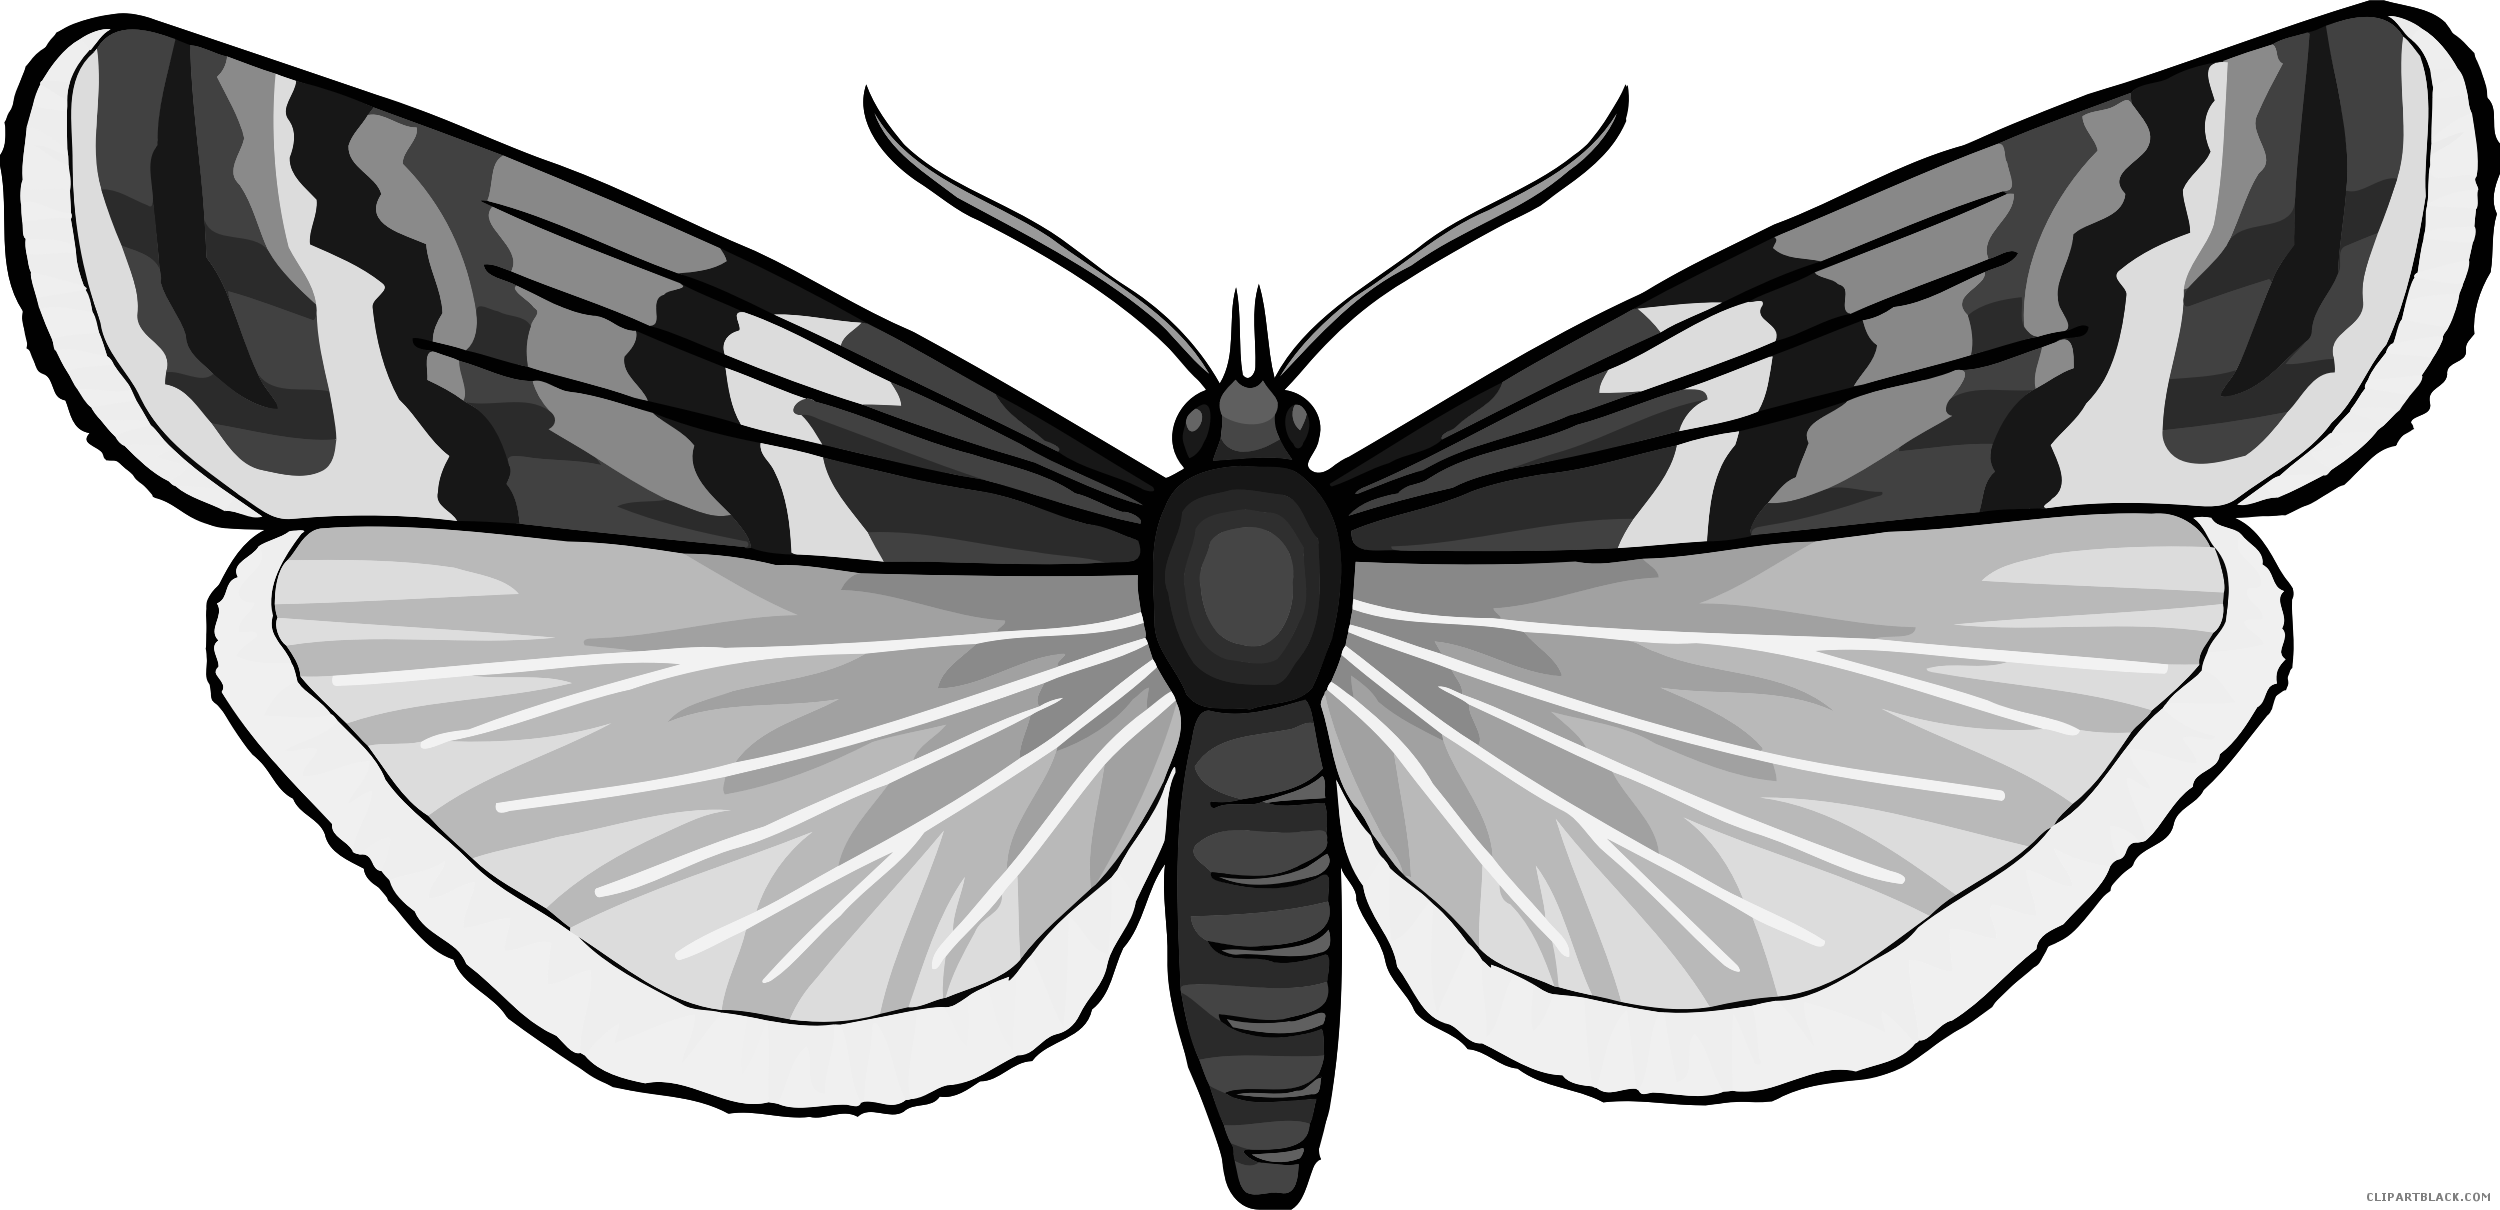 Grayscale Butterfly Animal Free Black White Clipart - Swallowtail Butterfly (2500x1210)